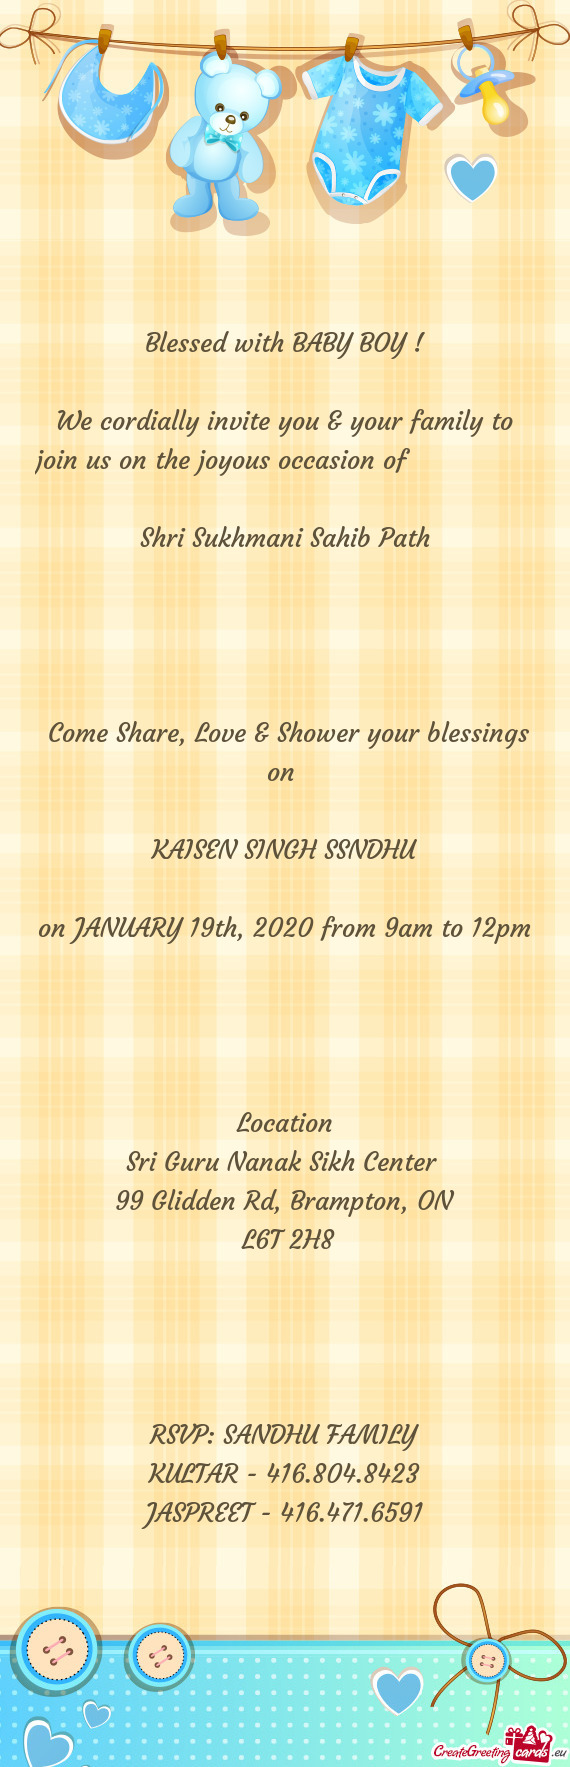 We cordially invite you & your family to join us on the joyous occasion of     Shri Su